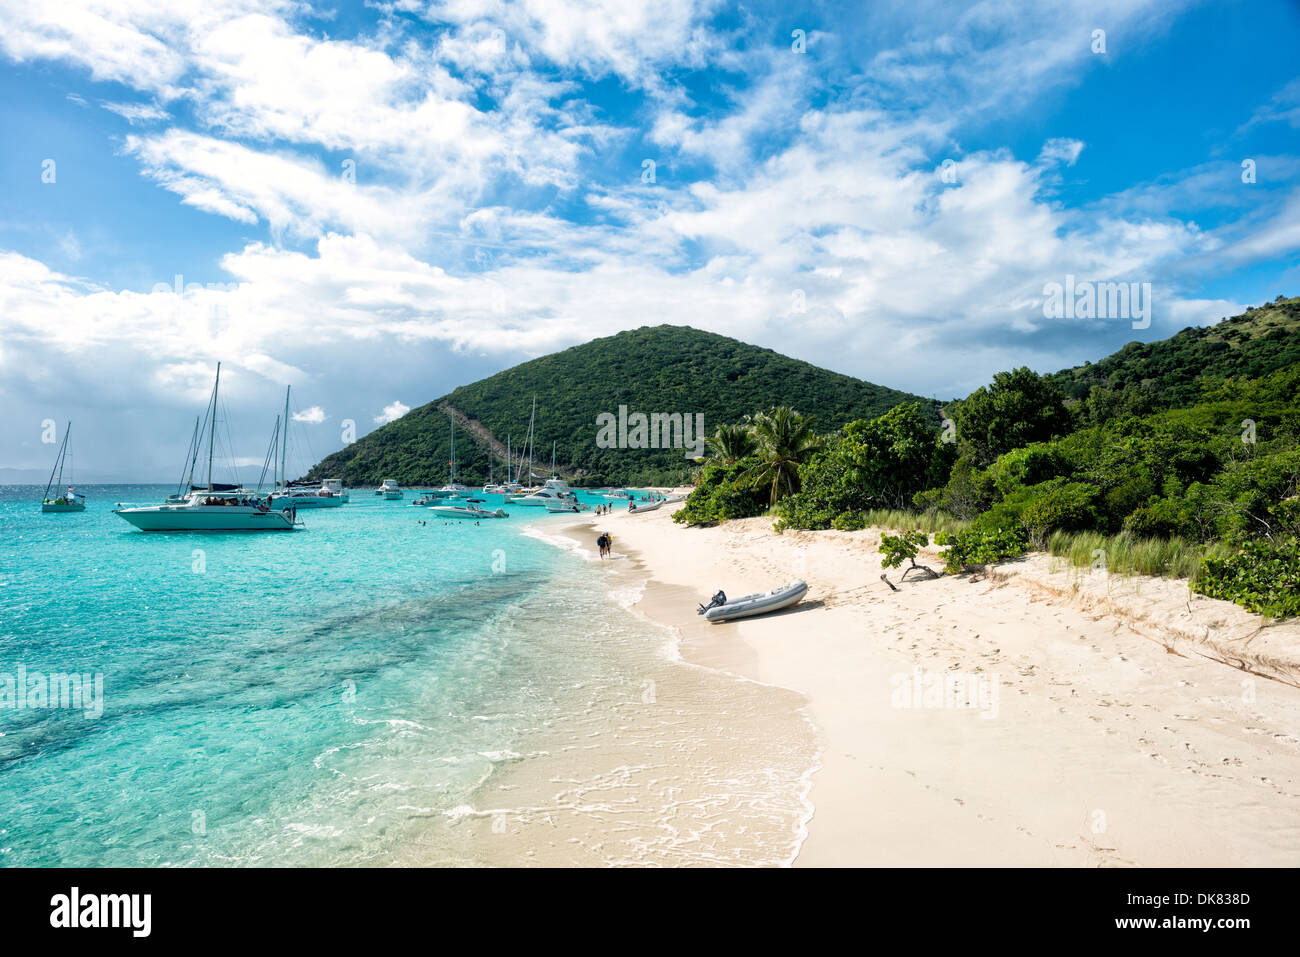 White Bay on Jost Van Dyke in the British Virgin Islands. The beach is famous for a string of bars serving tropical drinks, most famously the Soggy Dollar Bar. Stock Photo